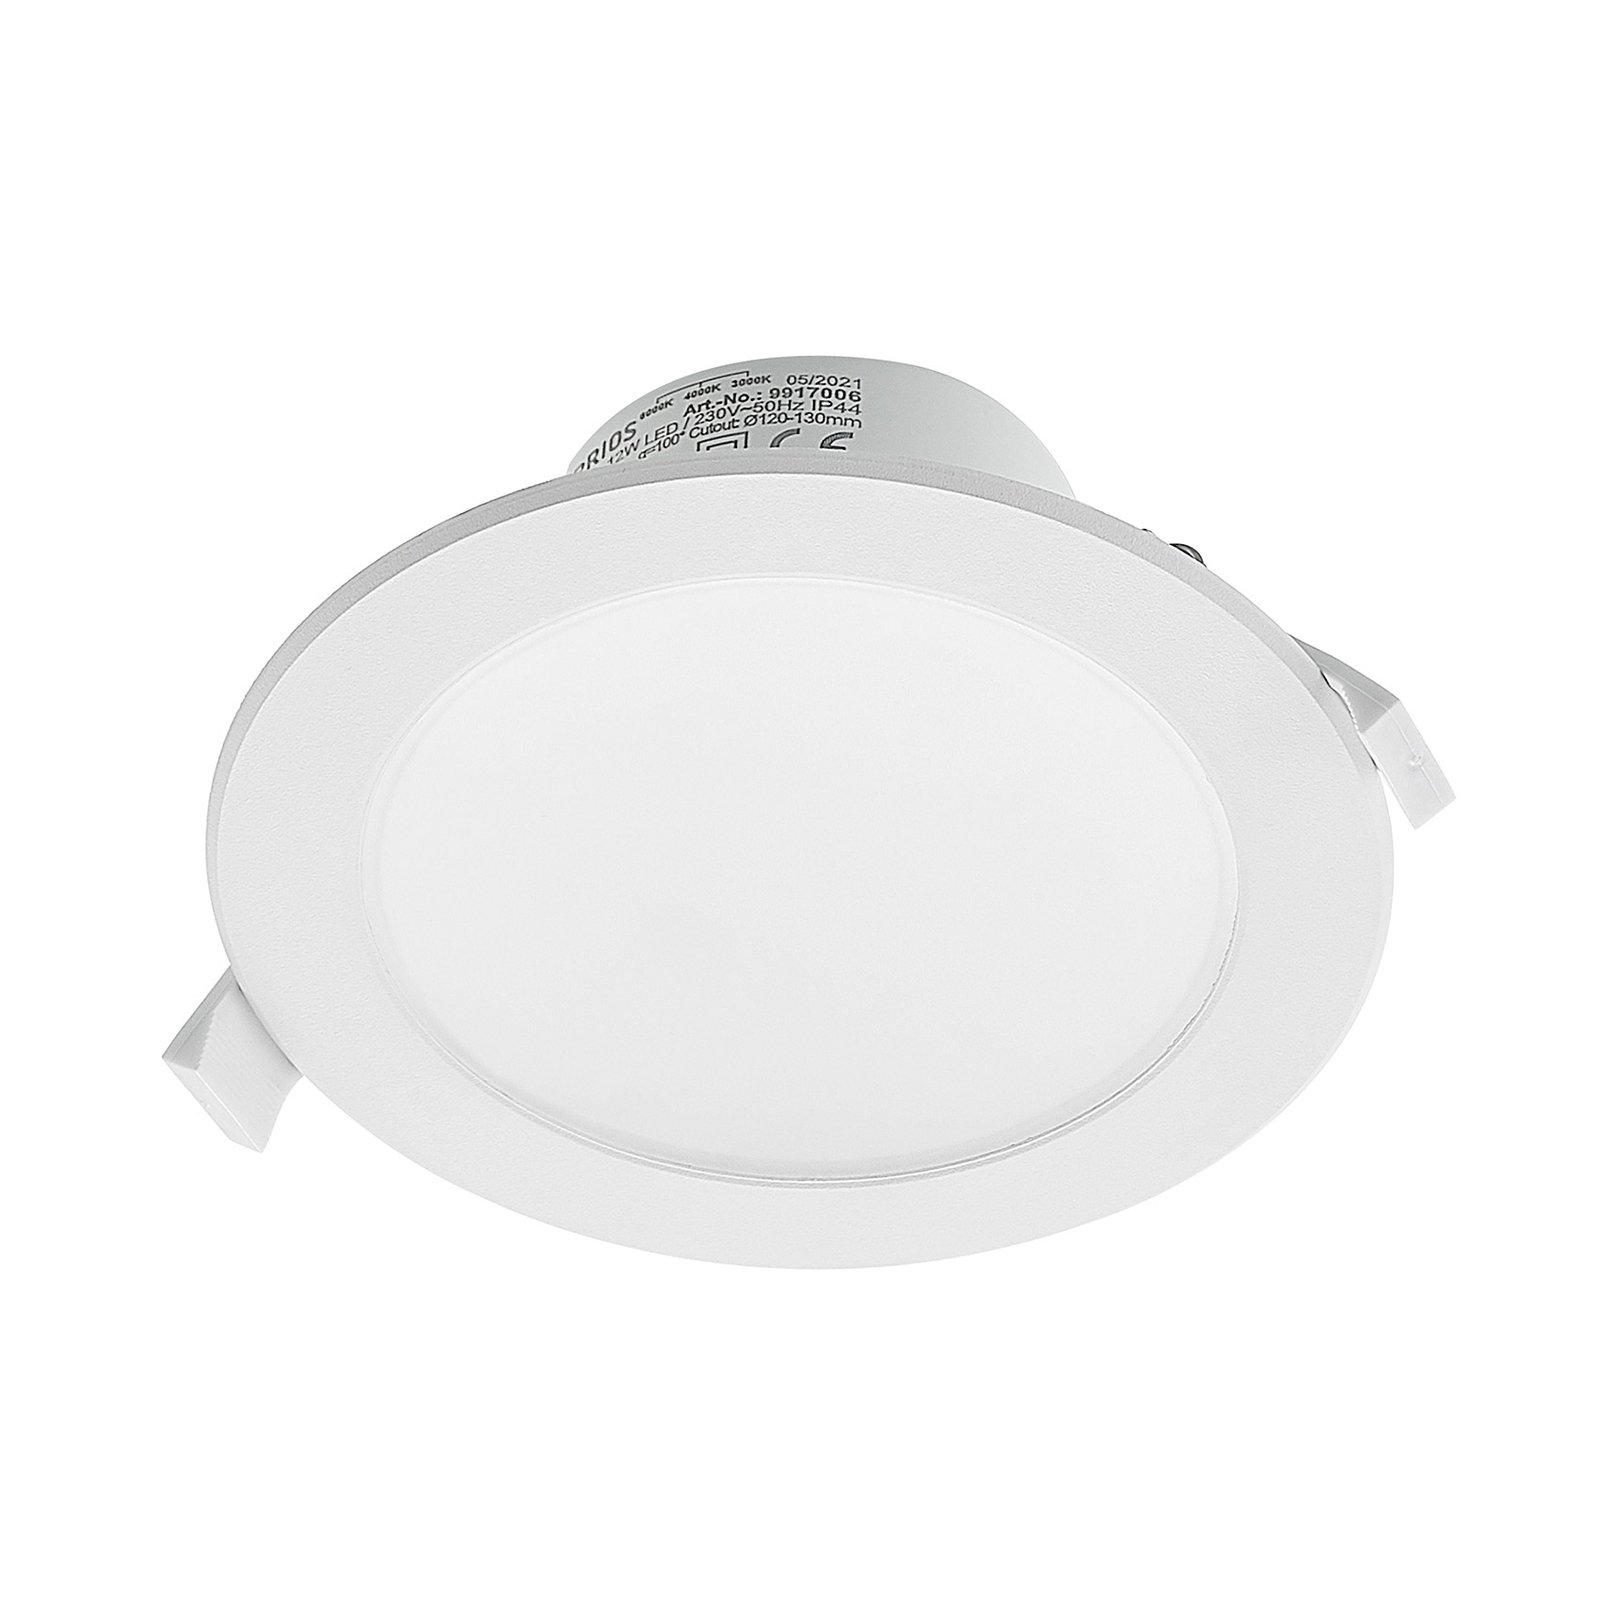 Prios LED recessed spotlight Rida, 14.5 cm, 12 W, CCT, dimmable